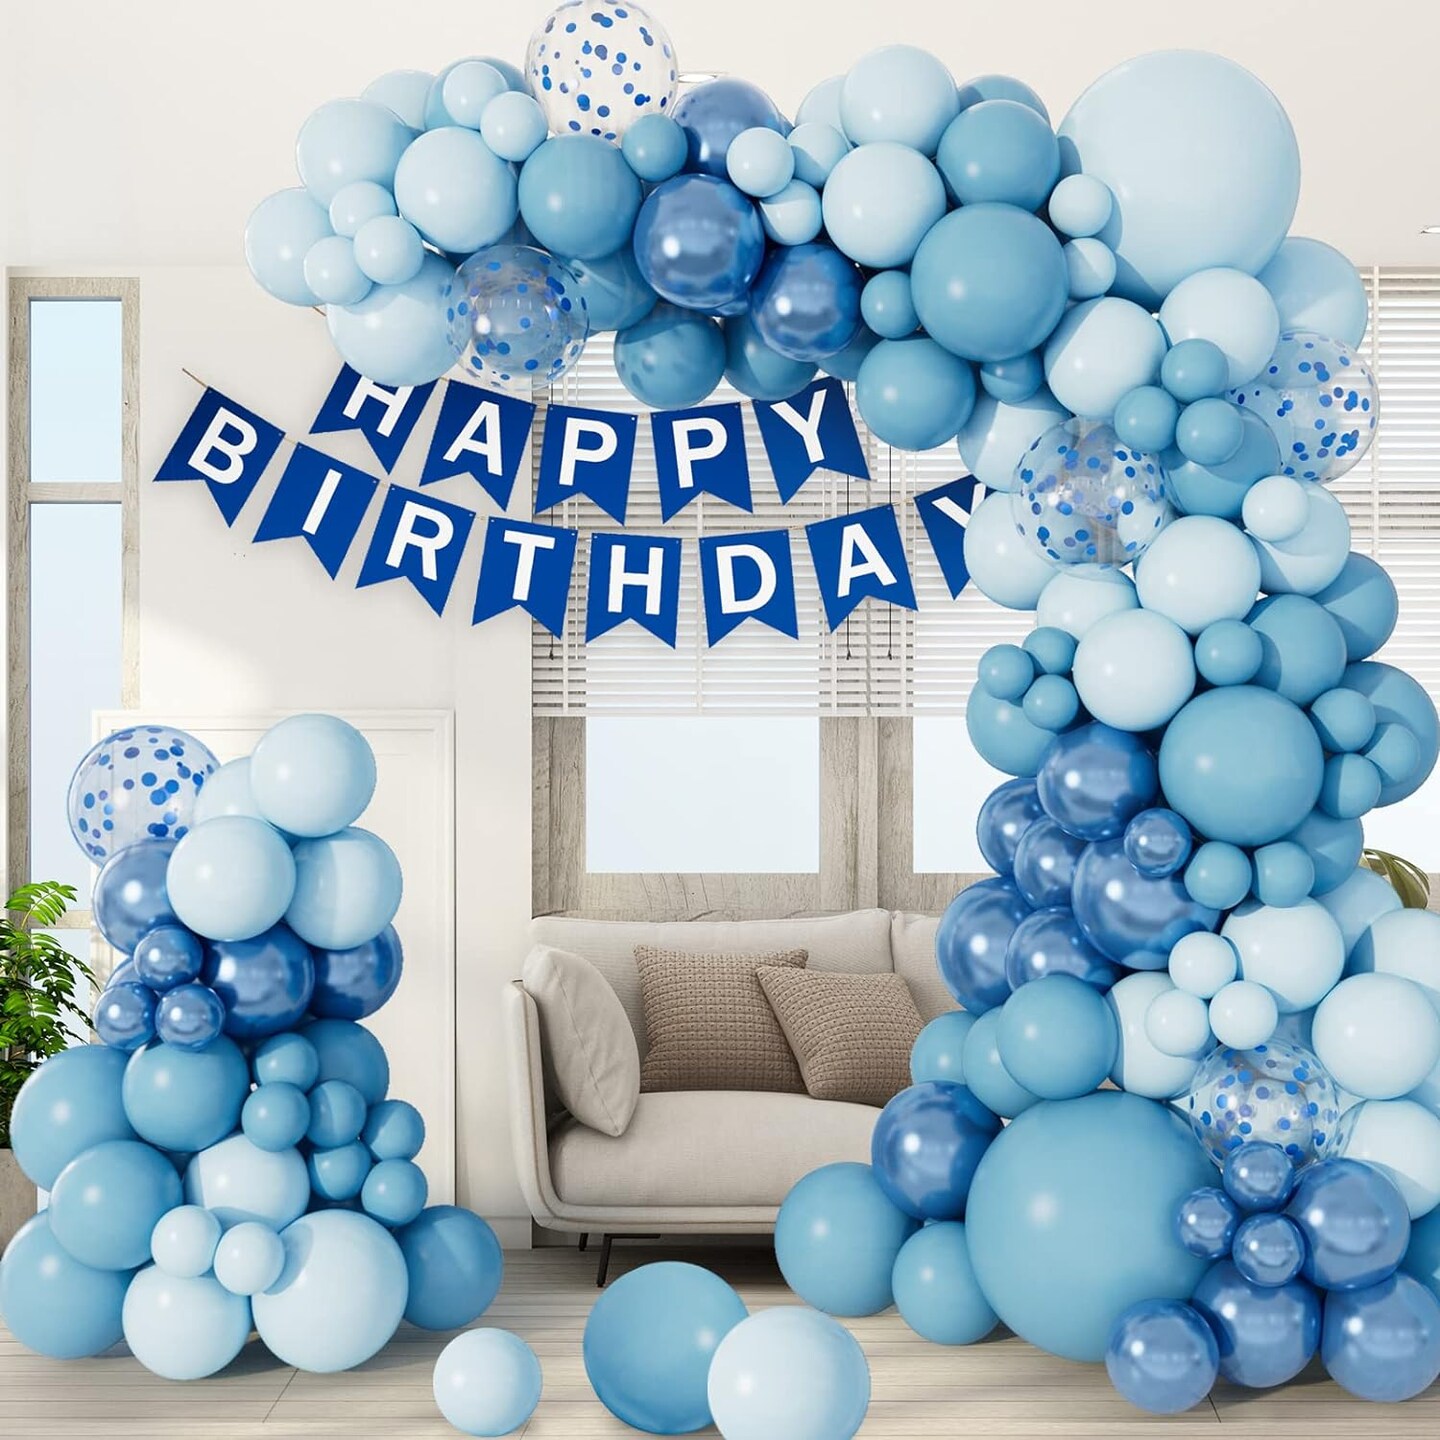 138pcs Blue Balloon Arch Garland Kit with Different Size Metallic Macaron Pastel Blue Confetti Balloons for Baby Shower Birthday Wedding Ocean Themed Party. Background Party Decoration